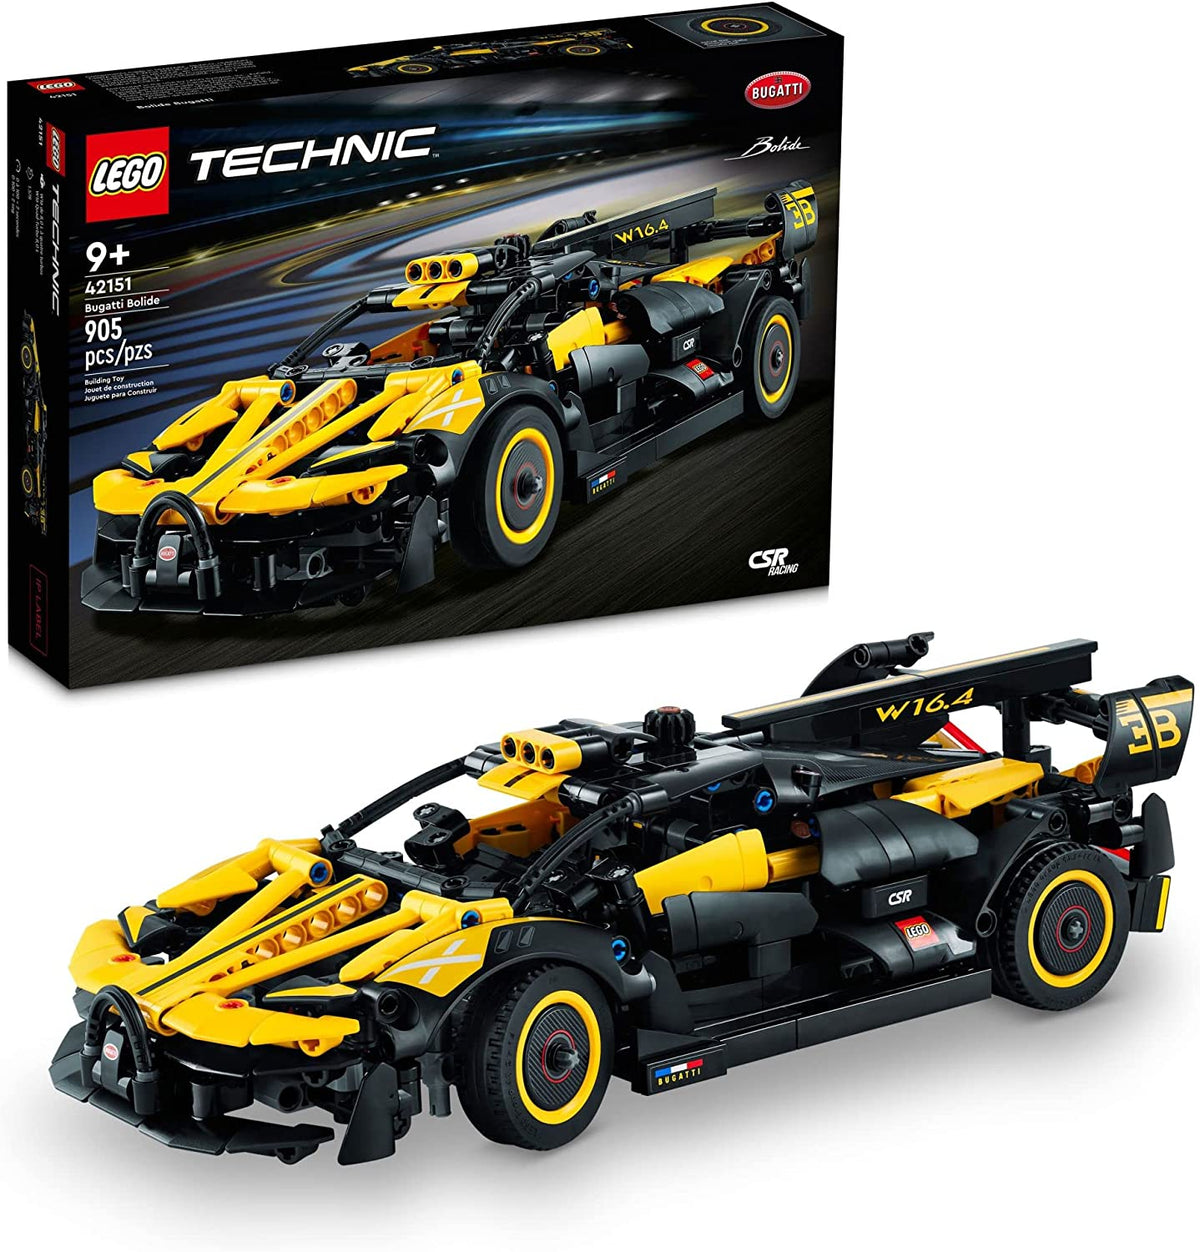 LEGO Technic Bugatti Bolide Racing Car Model Building Kit For Ages 9+